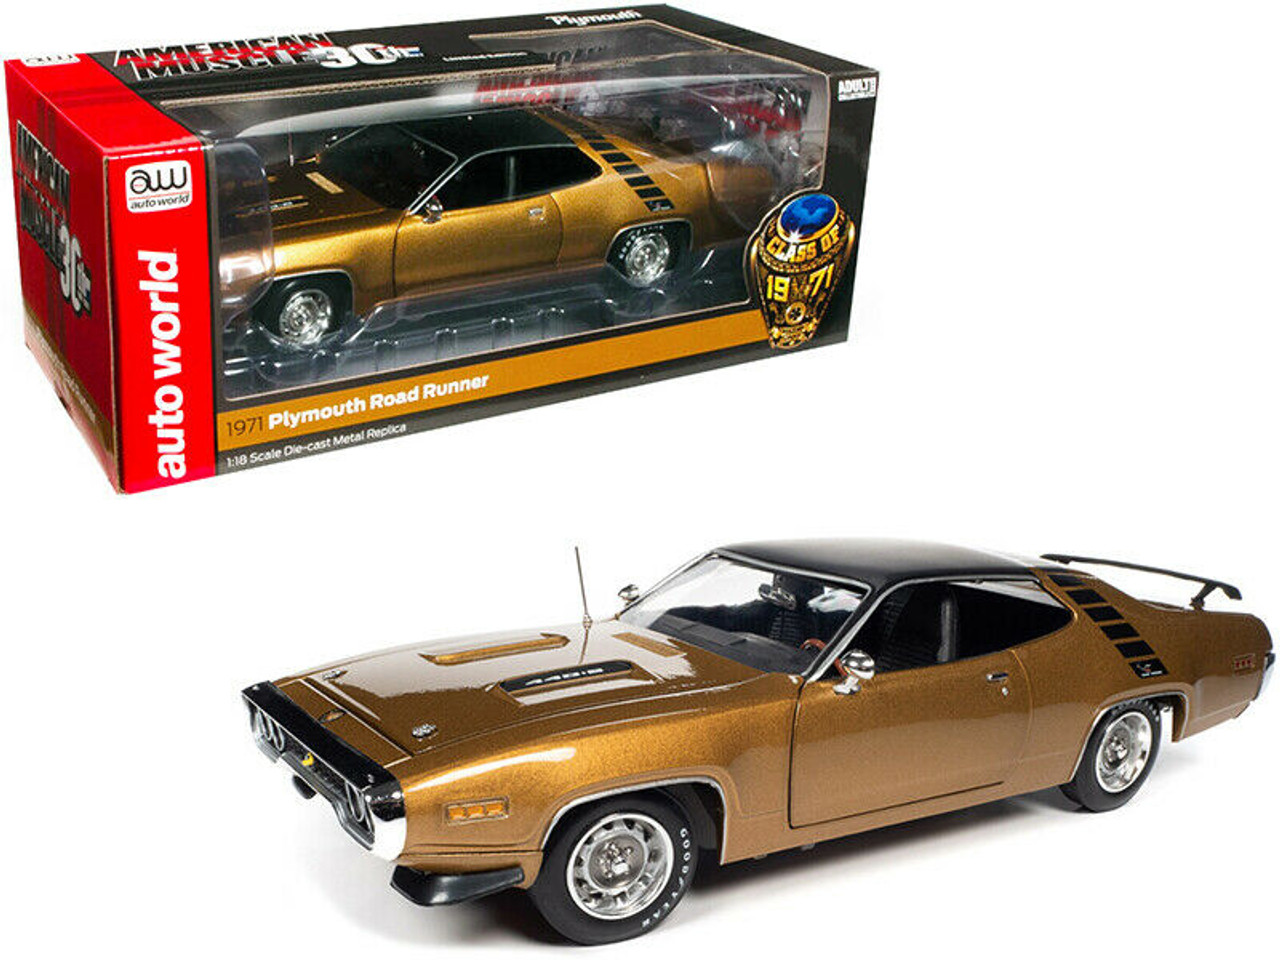 1/18 Auto World 1971 Plymouth Road Runner Hardtop (Gold) Diecast Car Model